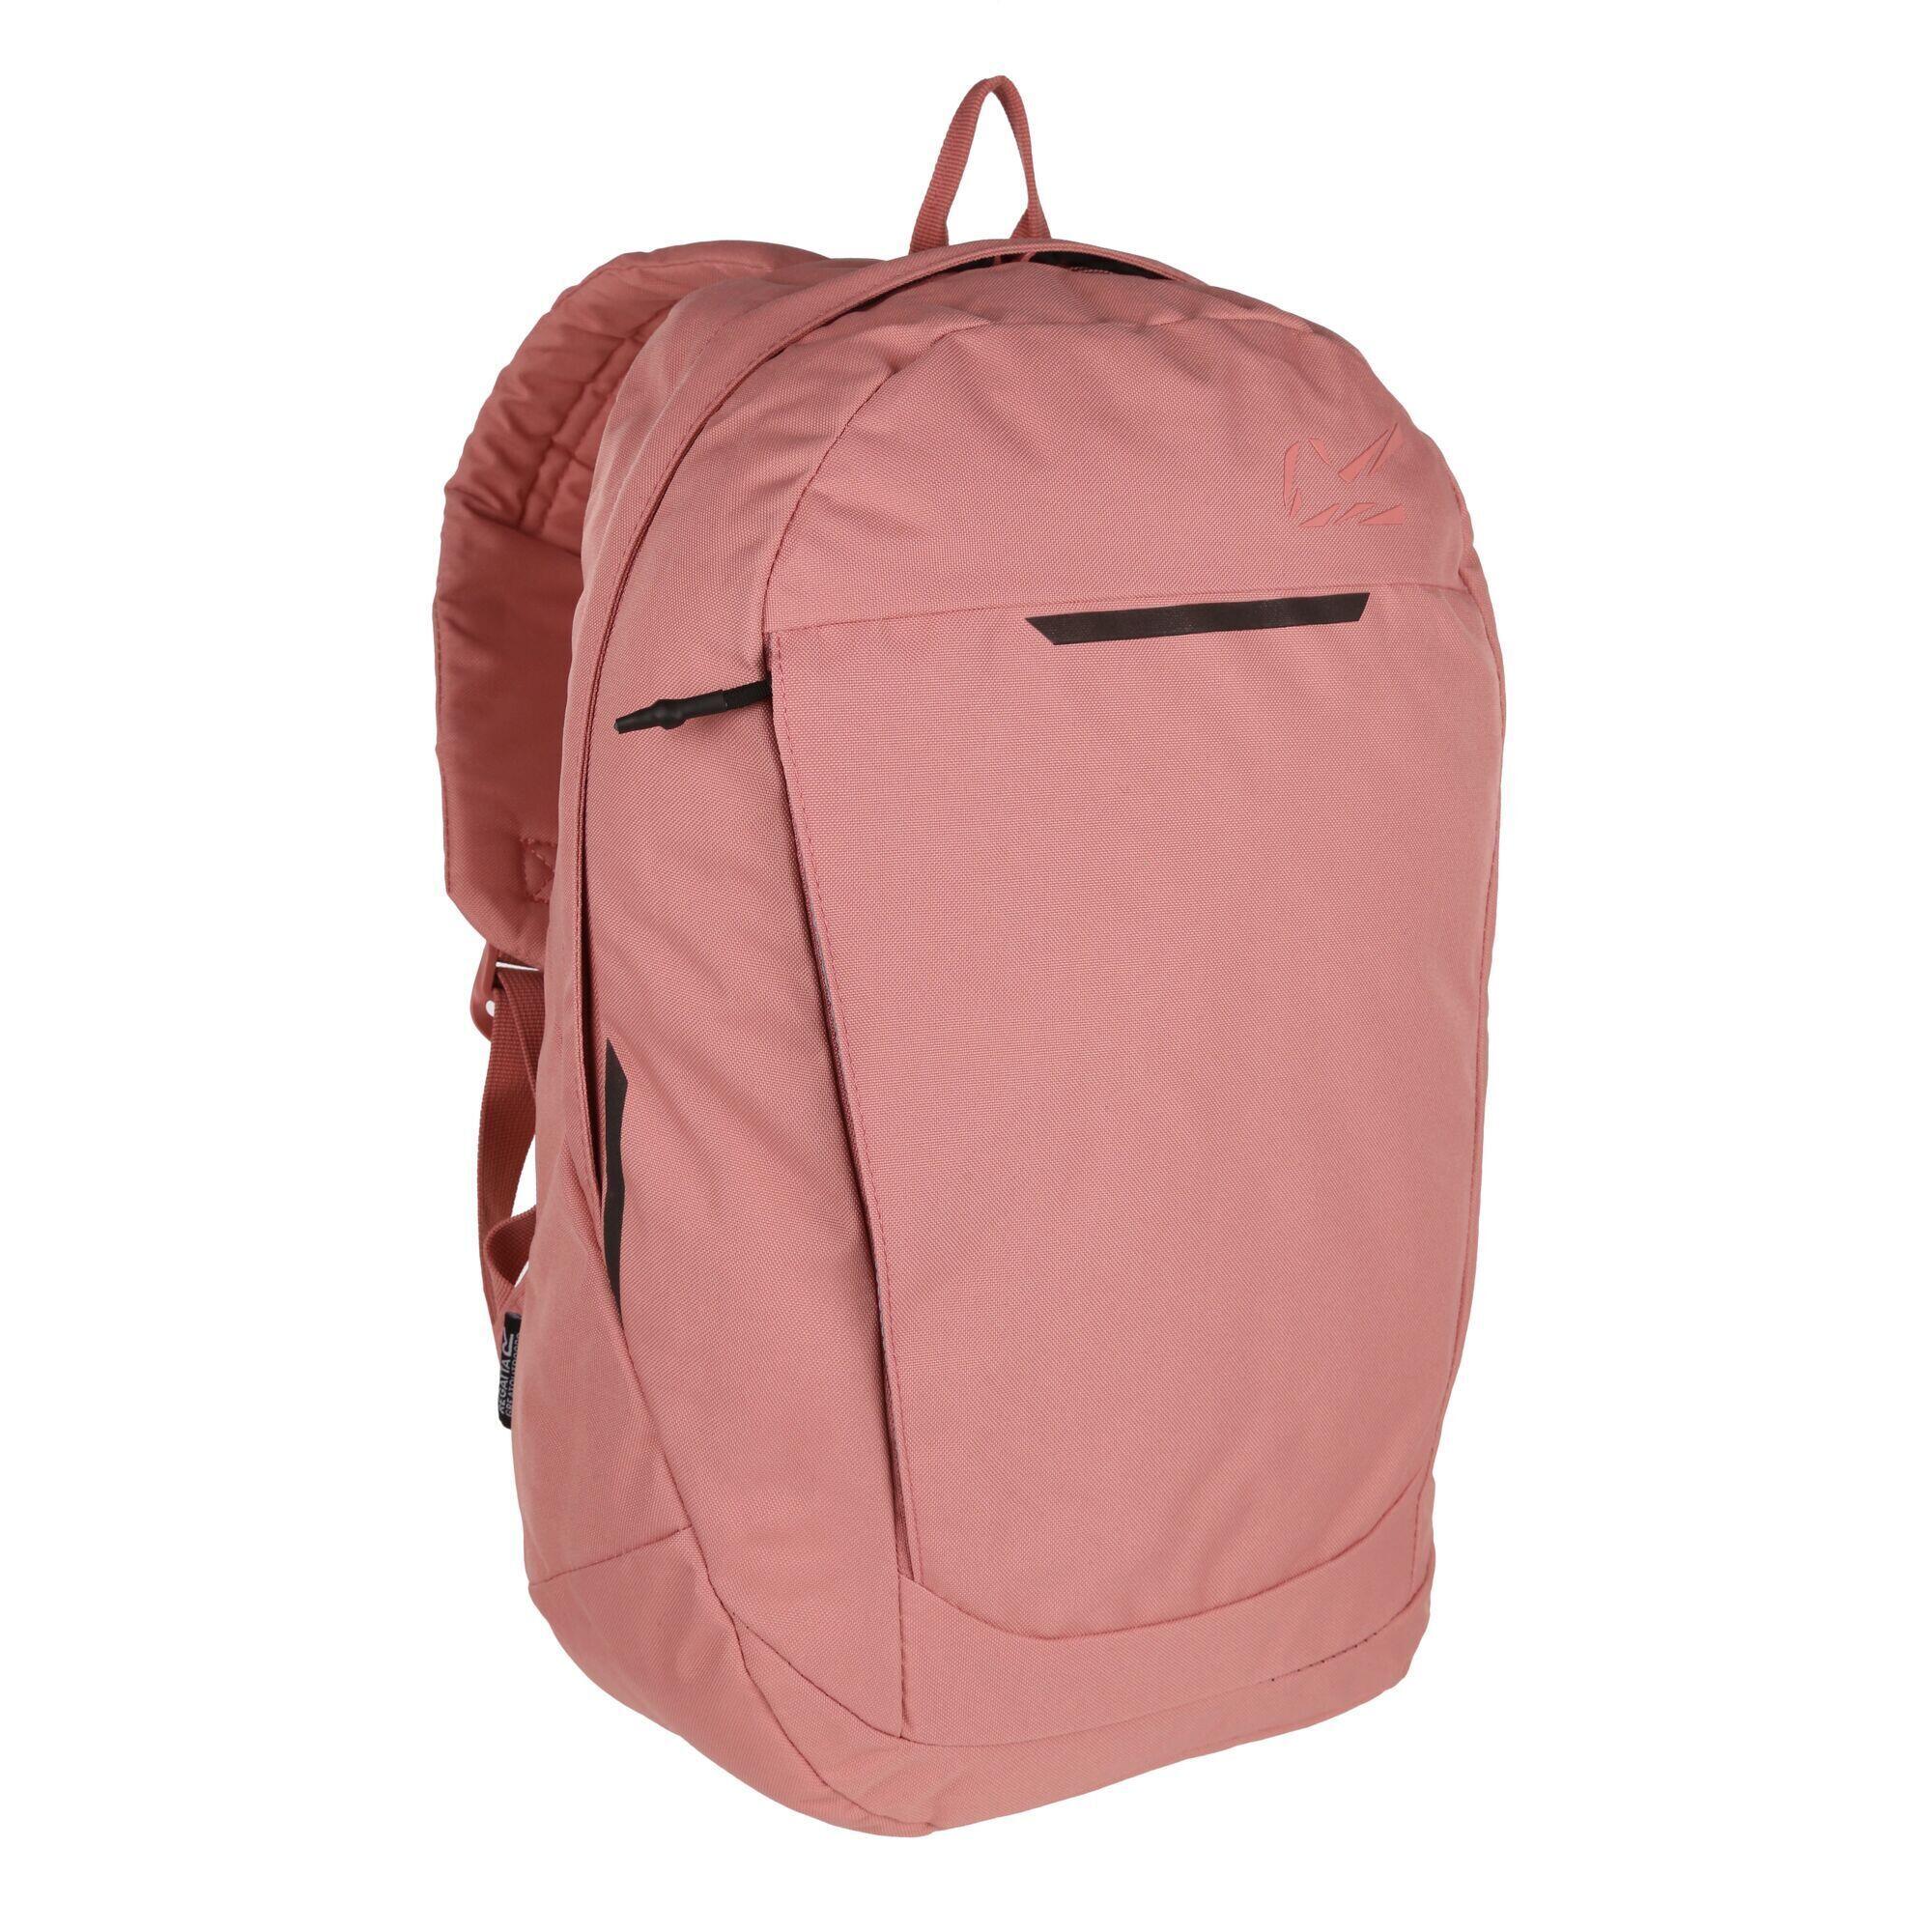 Backpack (Dusty Rose) 3/4